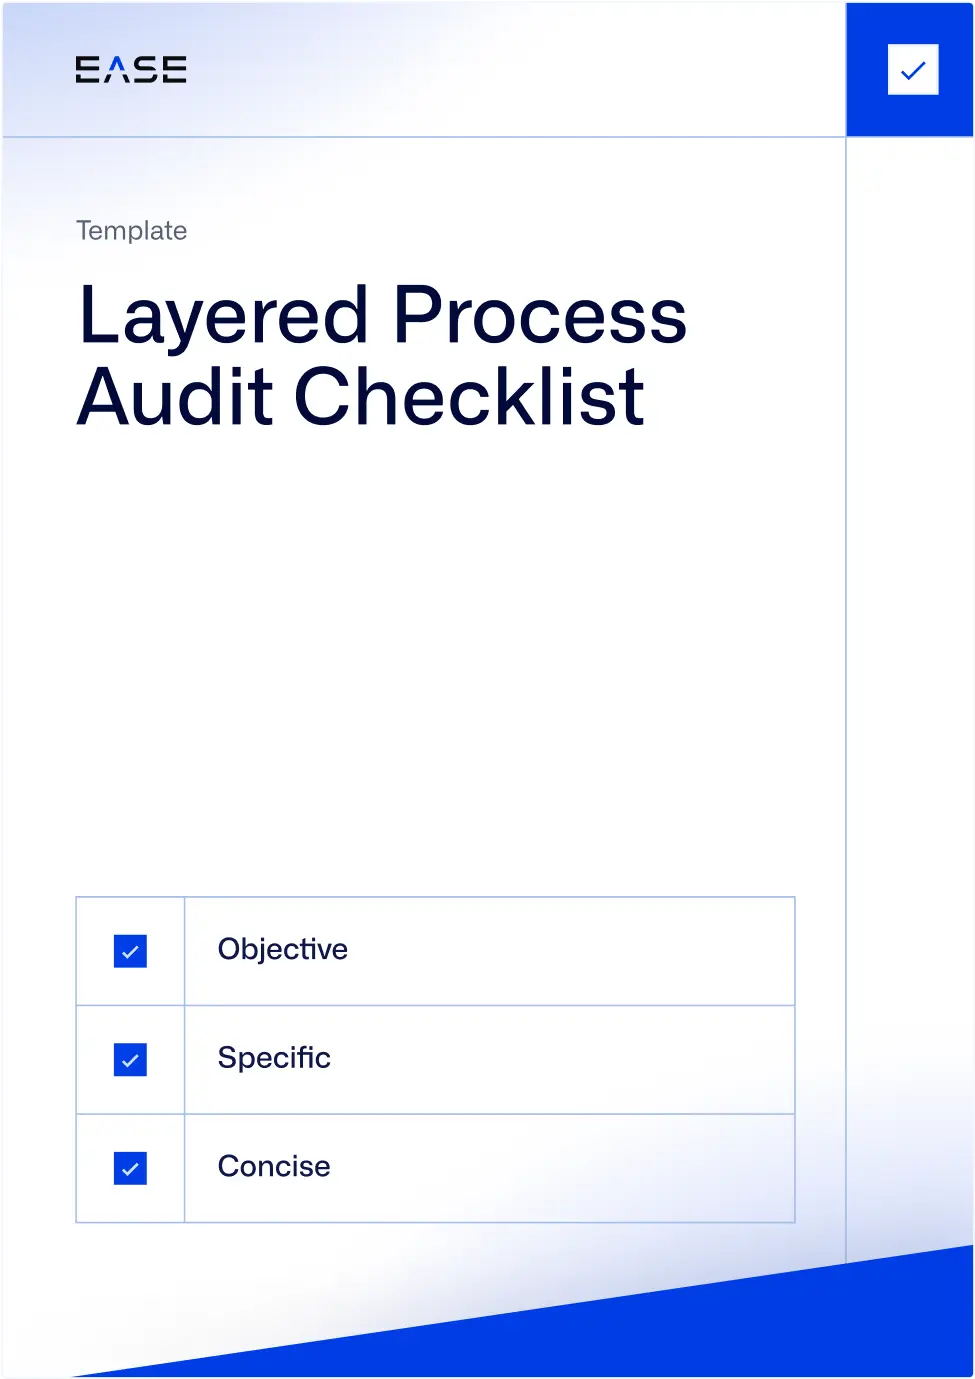 Layered process audit checklist template image